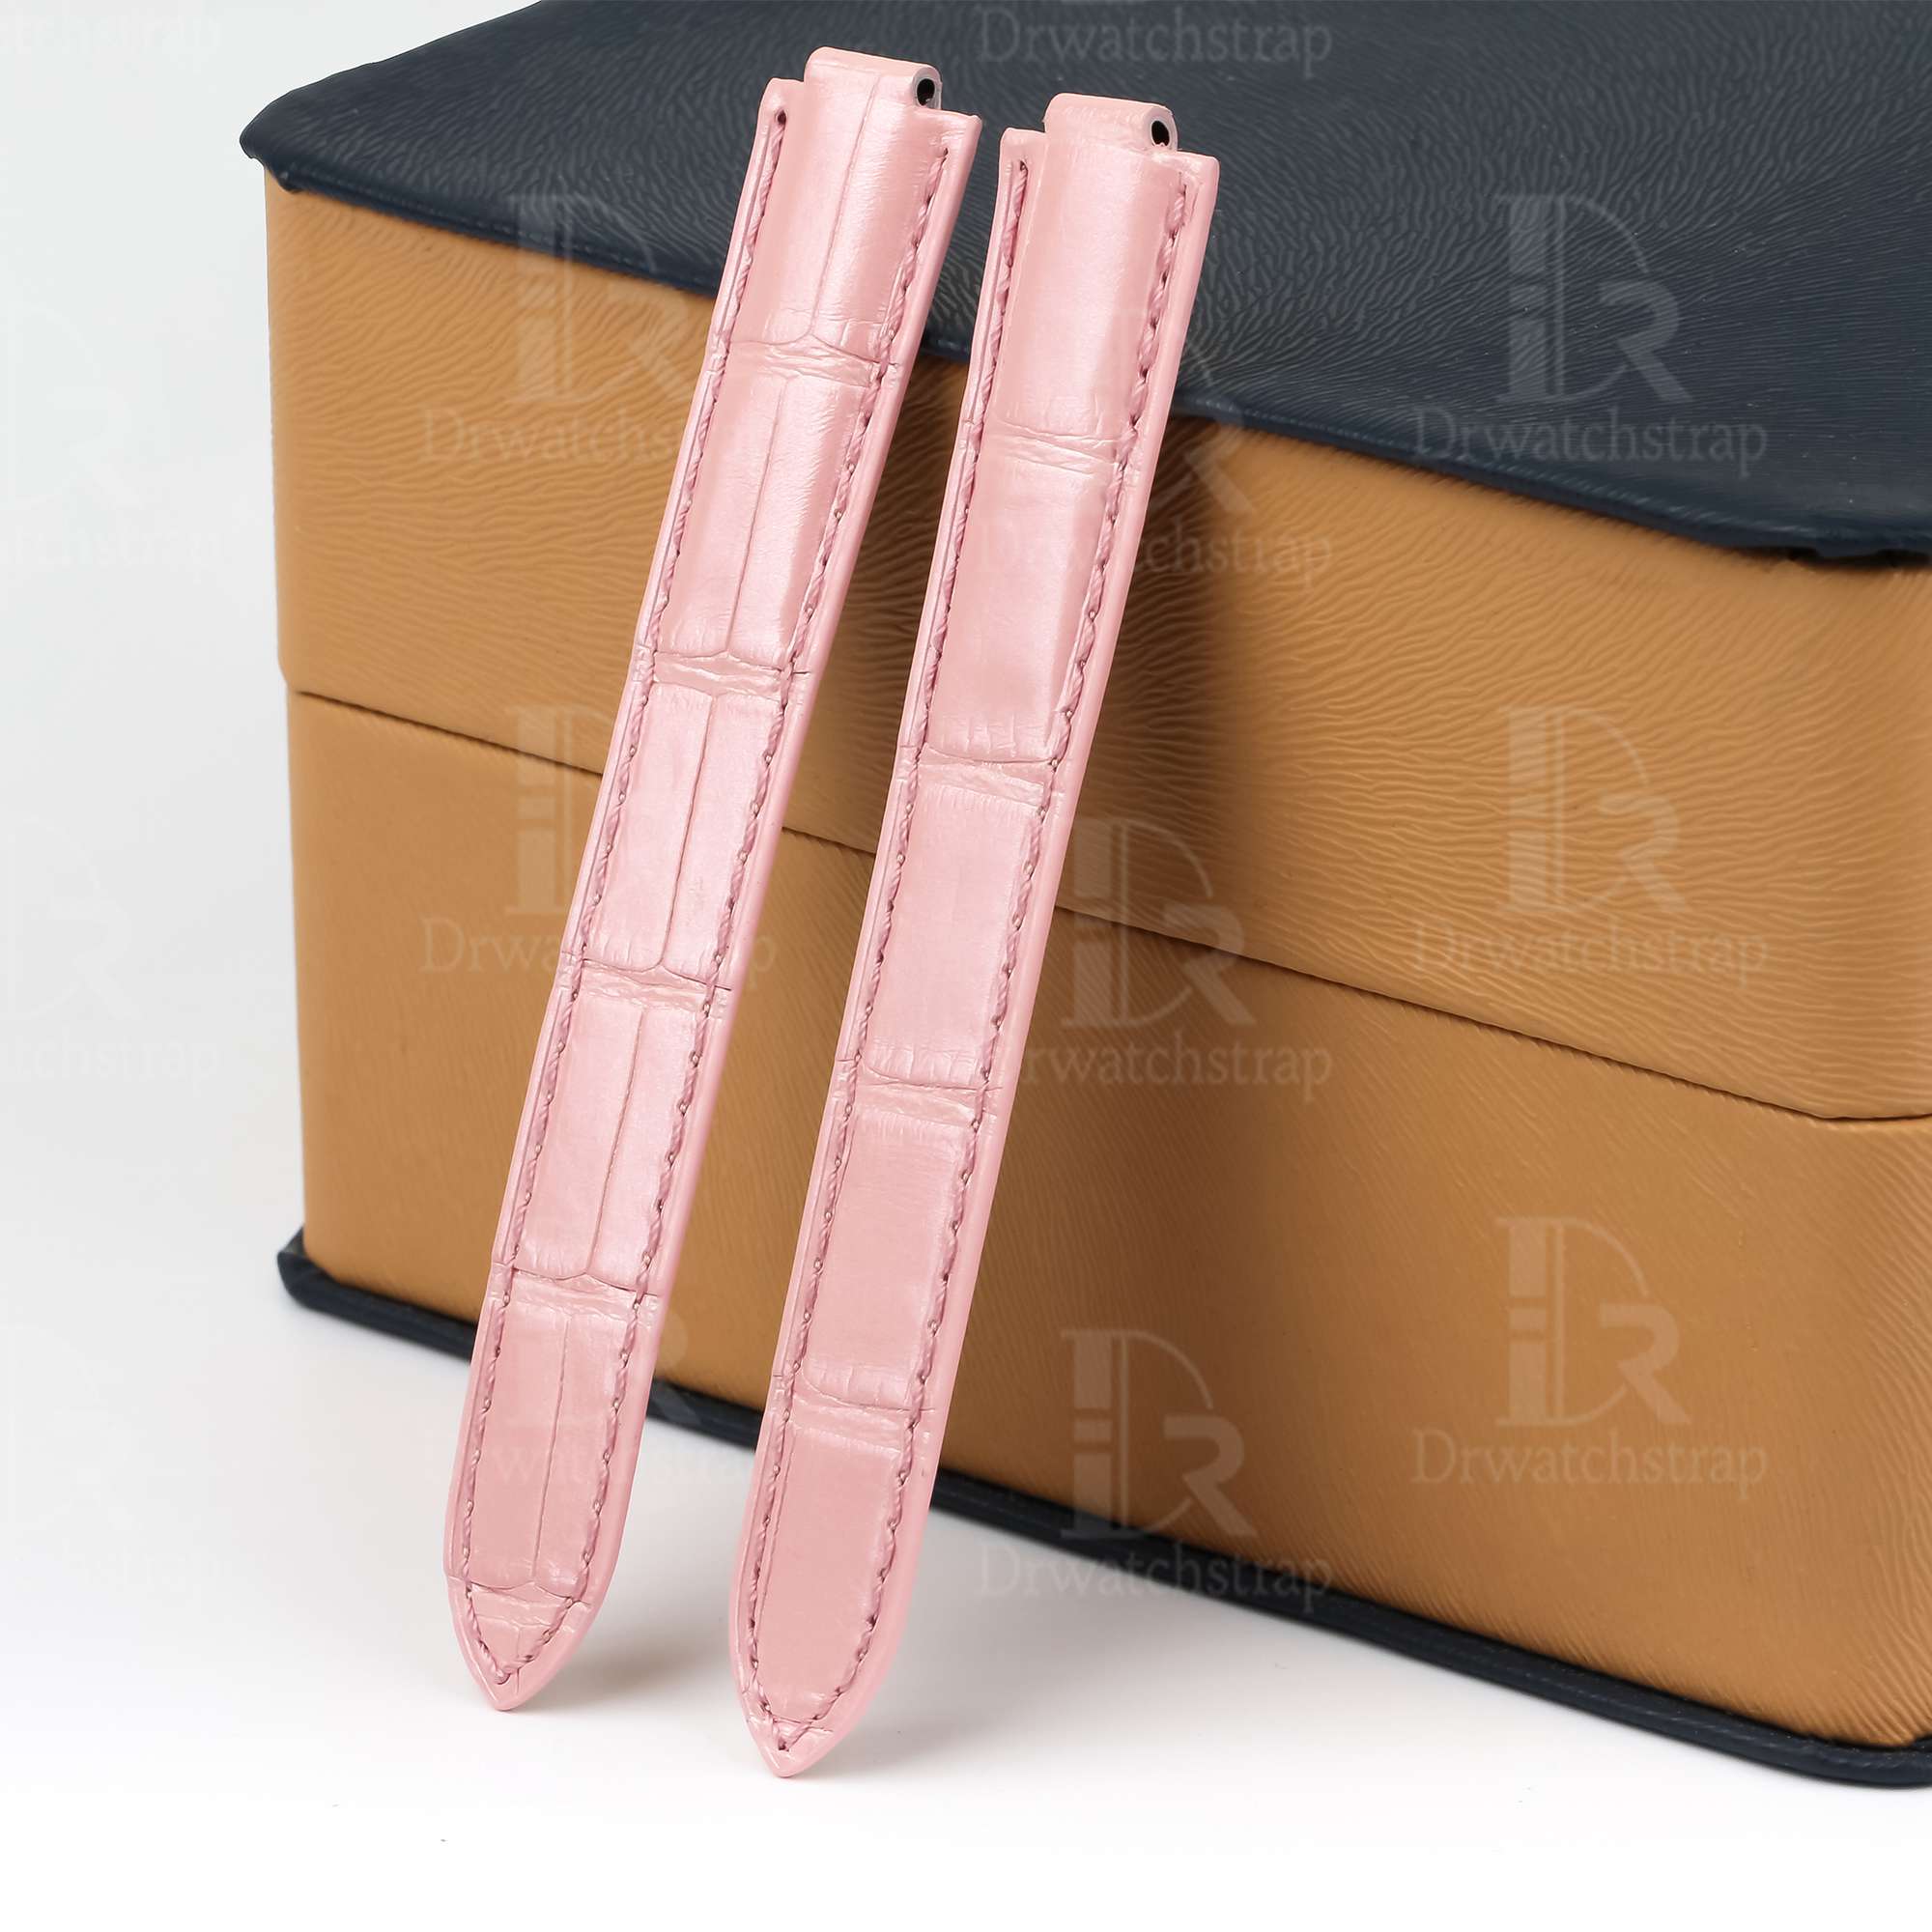 Genuine premium custom American Alligator Belly-scale Pink leather watch strap & watch band replacement for Cartier Ballon Bleu Lady Medium Men Large Chronograph Cartier watches online - Buy and shop the high-end best quality straps and watchbands from dr watchstrap at a low price